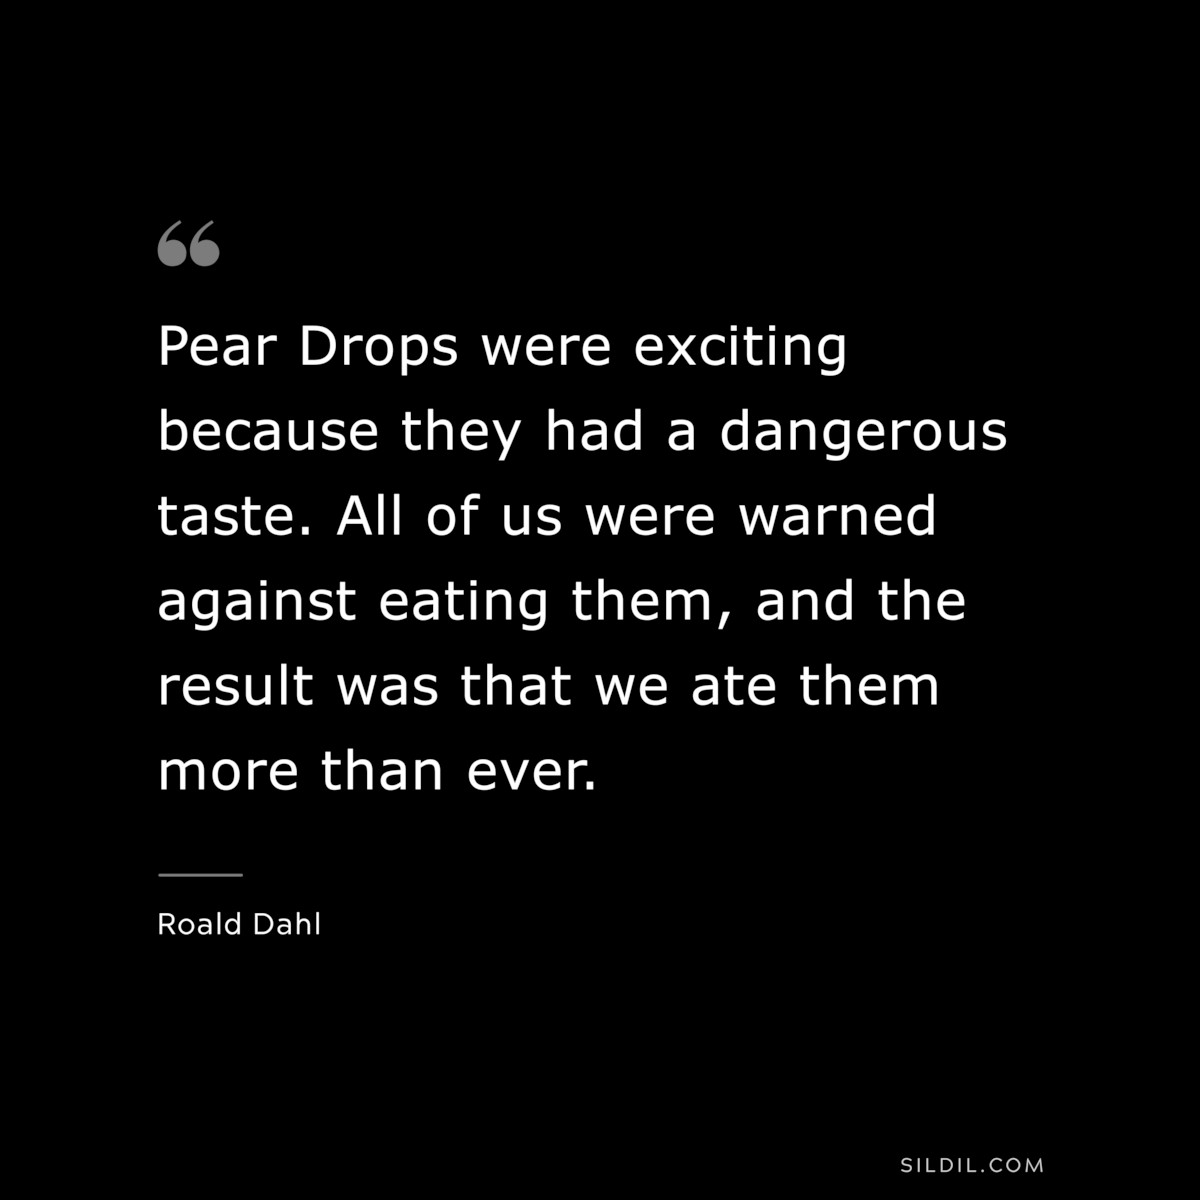 Pear Drops were exciting because they had a dangerous taste. All of us were warned against eating them, and the result was that we ate them more than ever. ― Roald Dahl